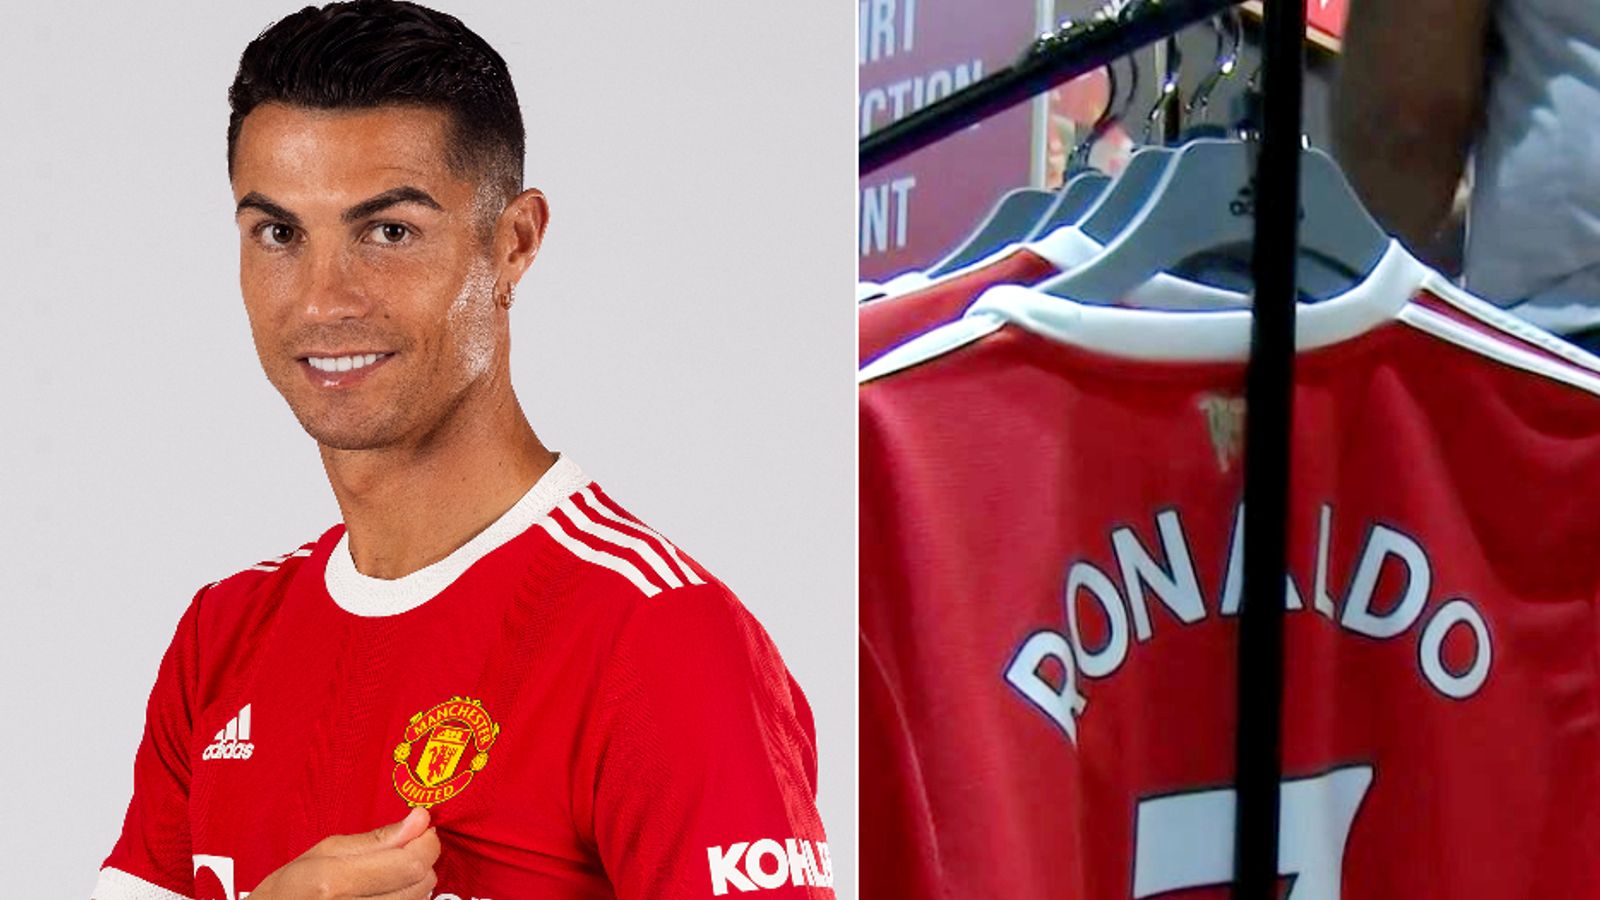 old ronaldo manchester united jersey